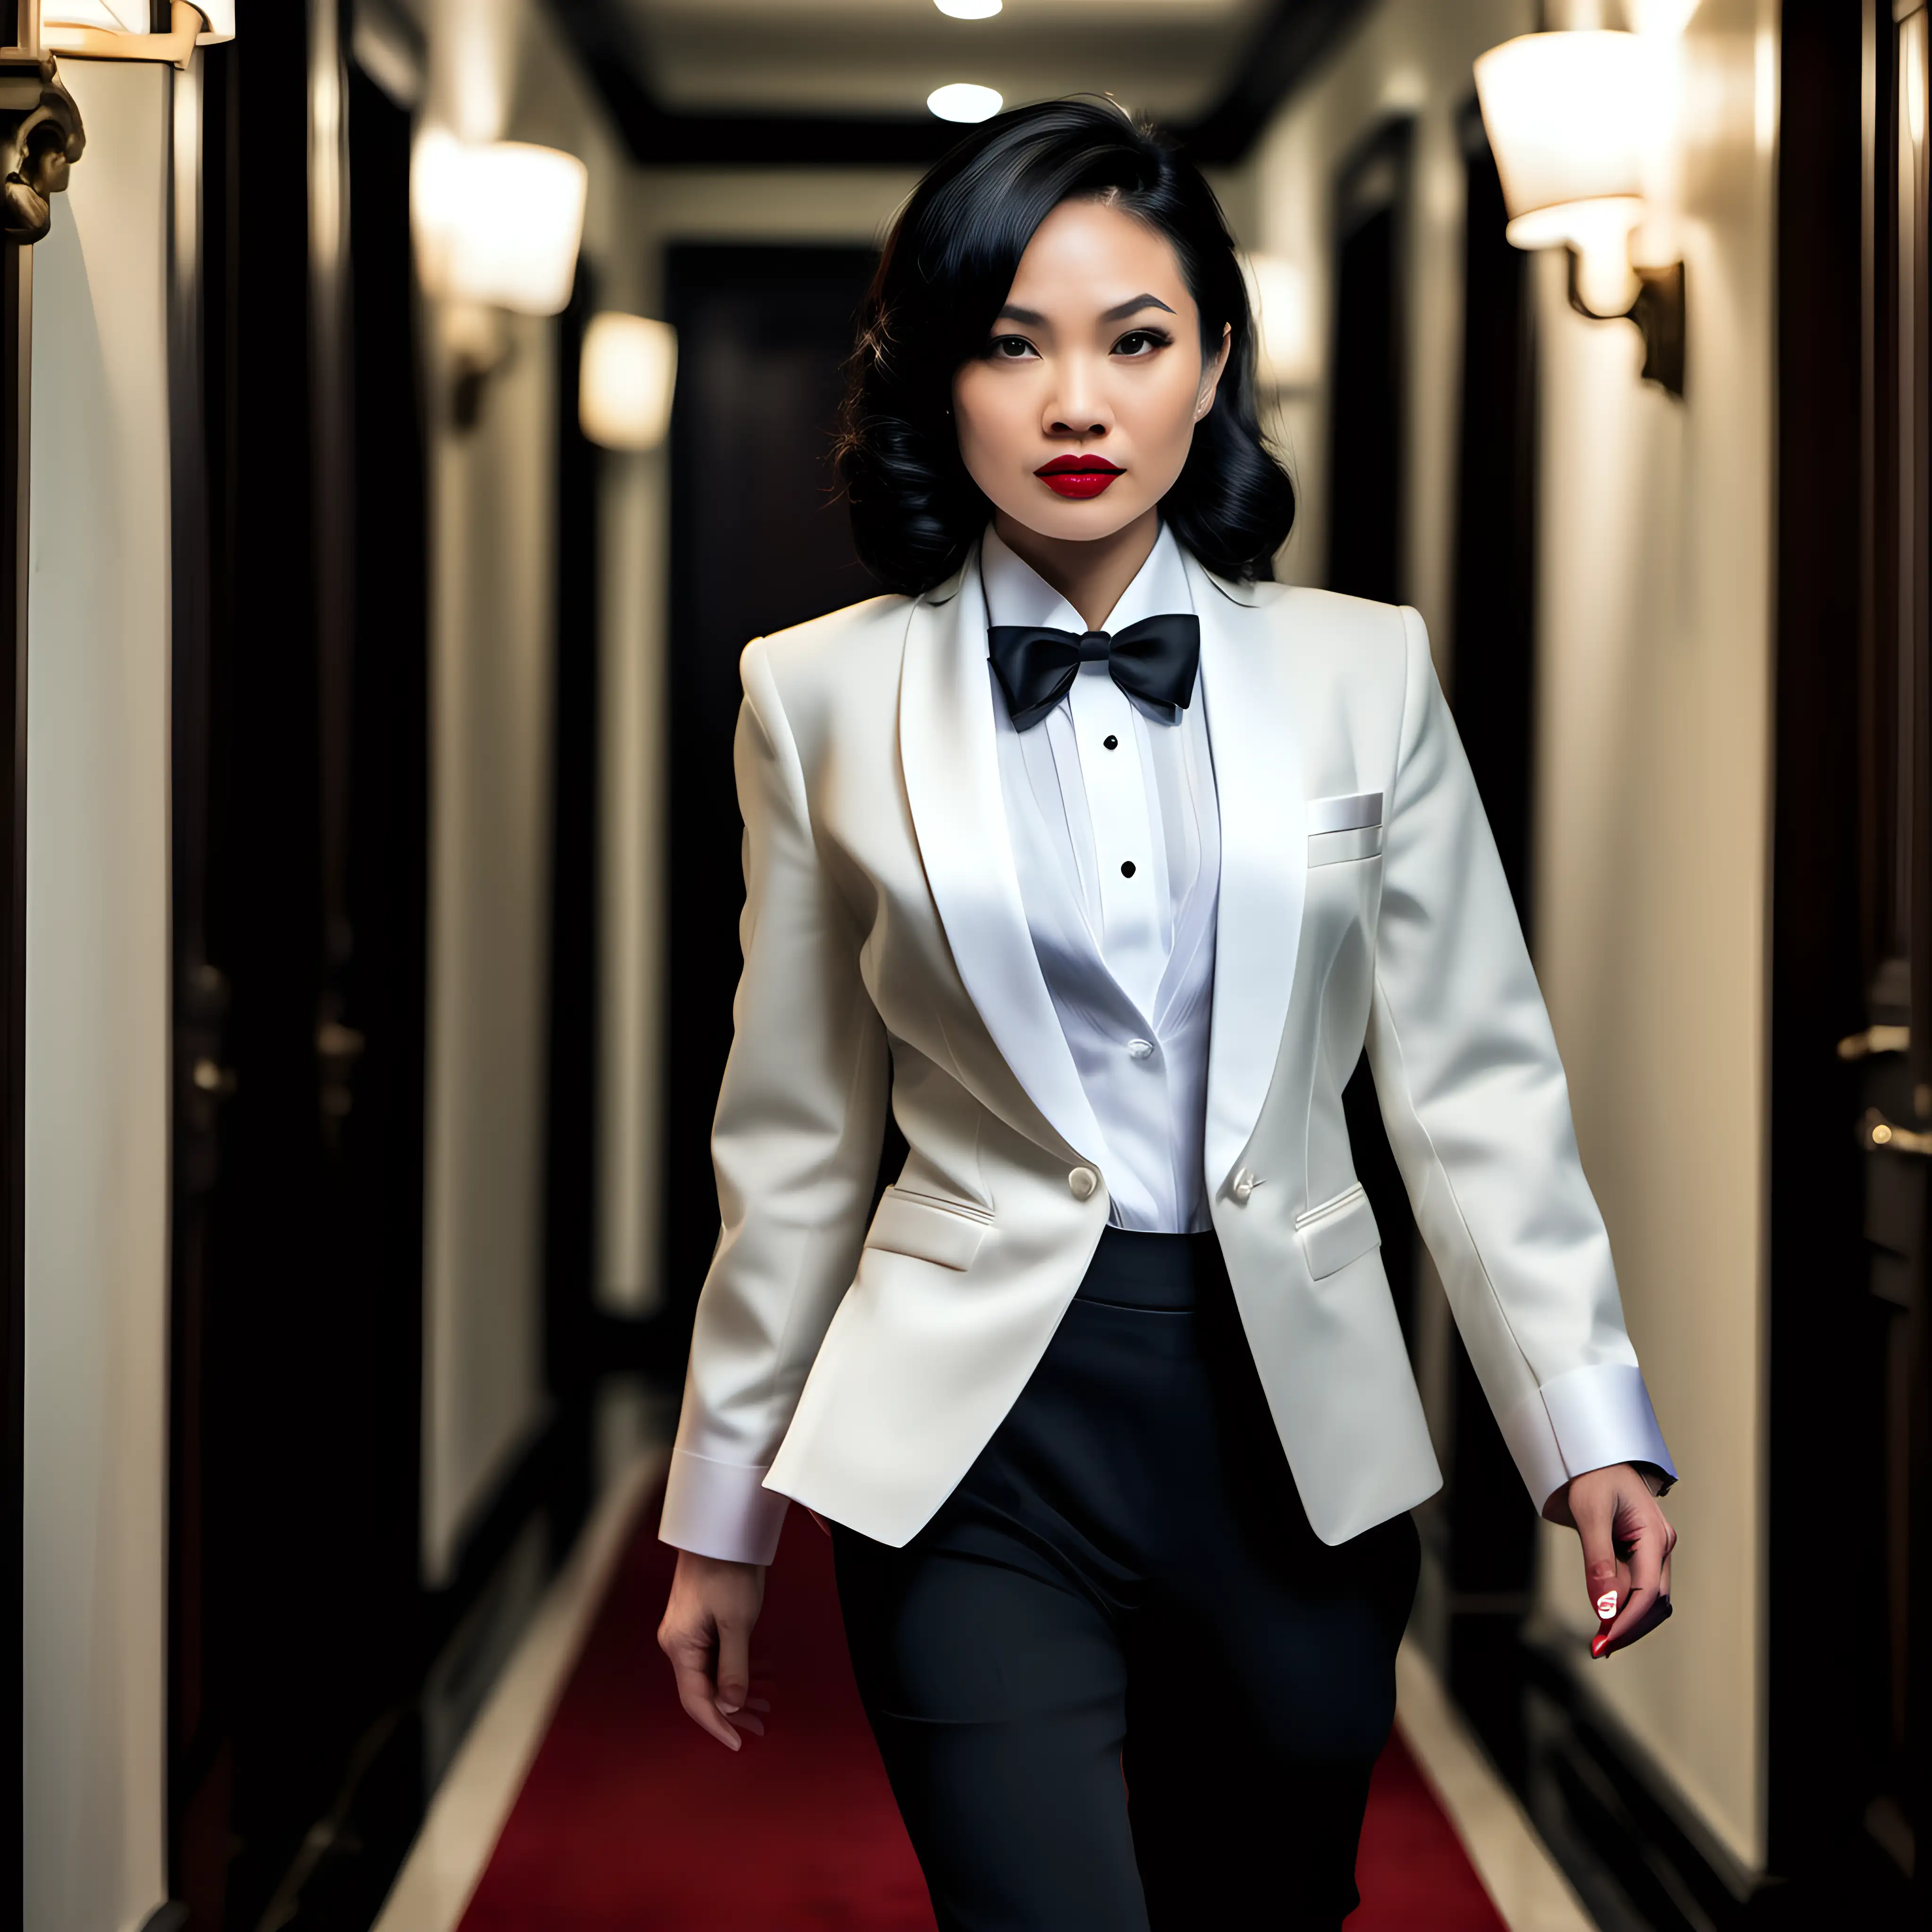 A petite 35-year-old attractive Vietnamese woman with black shoulder-length hair and red lipstick wearing a formal tuxedo with an ivory dinner jacket, a black bow tie, black cufflinks, and black pants. Her shirt has French double cuffs. She is wearing a corsage and her jacket is open. She is walking down a dark hallway in a mansion.